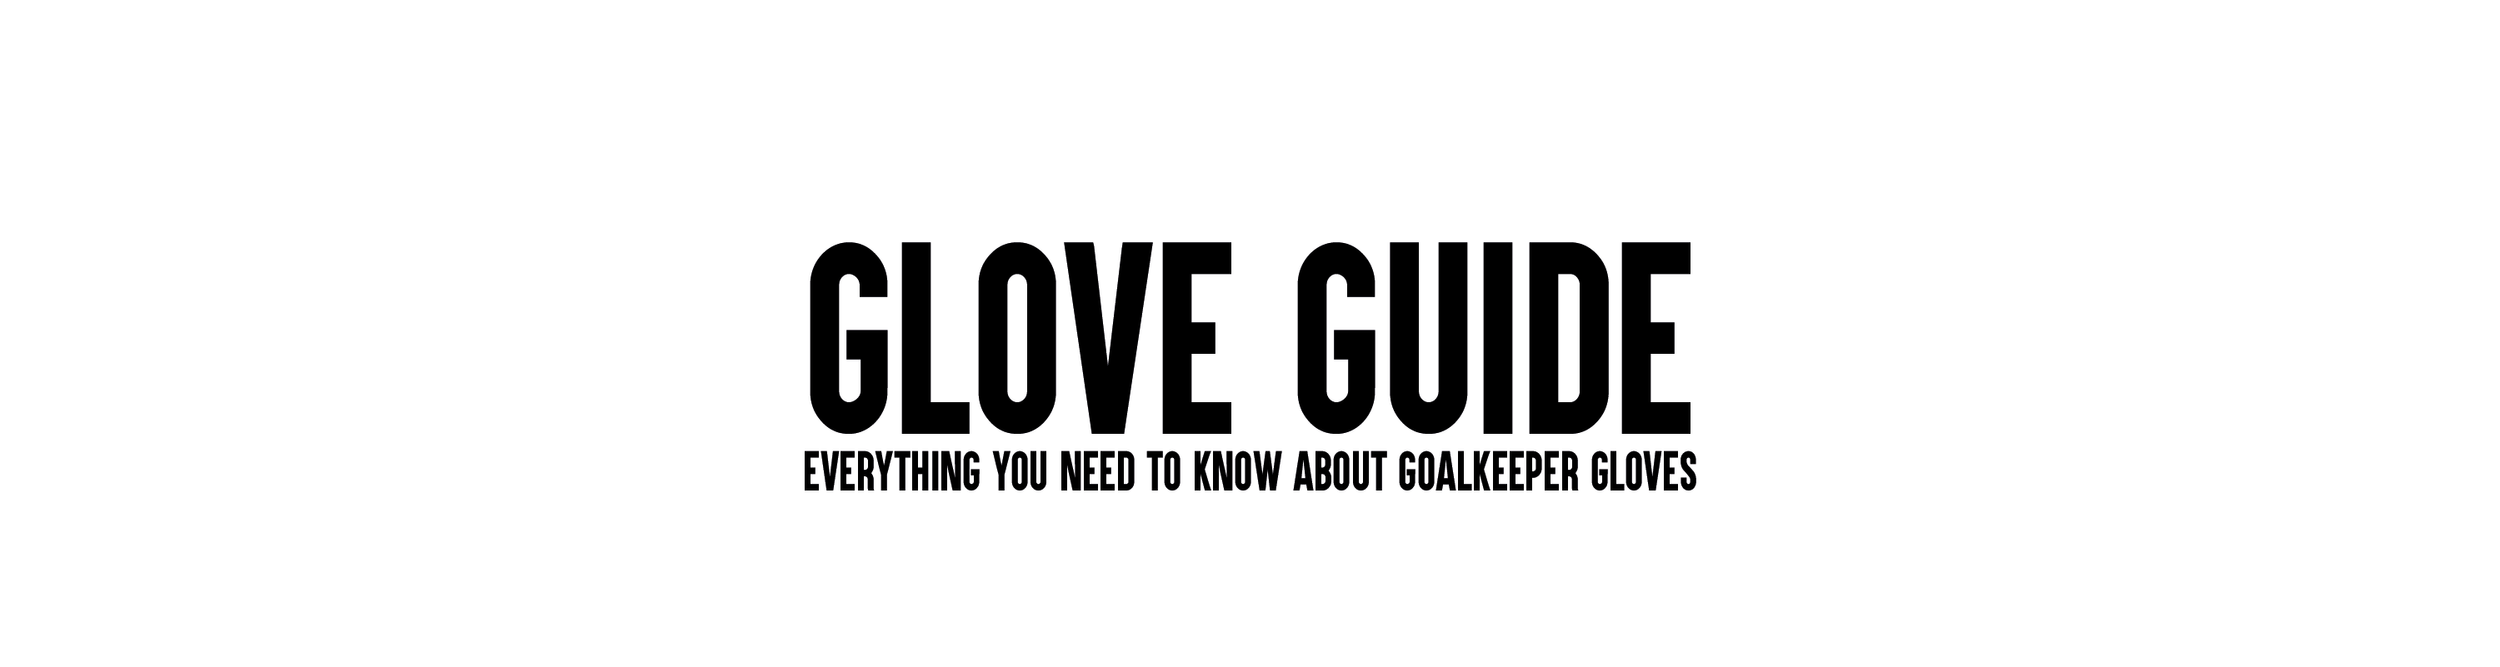 Goalkeeper Glove Guide Everything you need to know about goalkeeper gloves